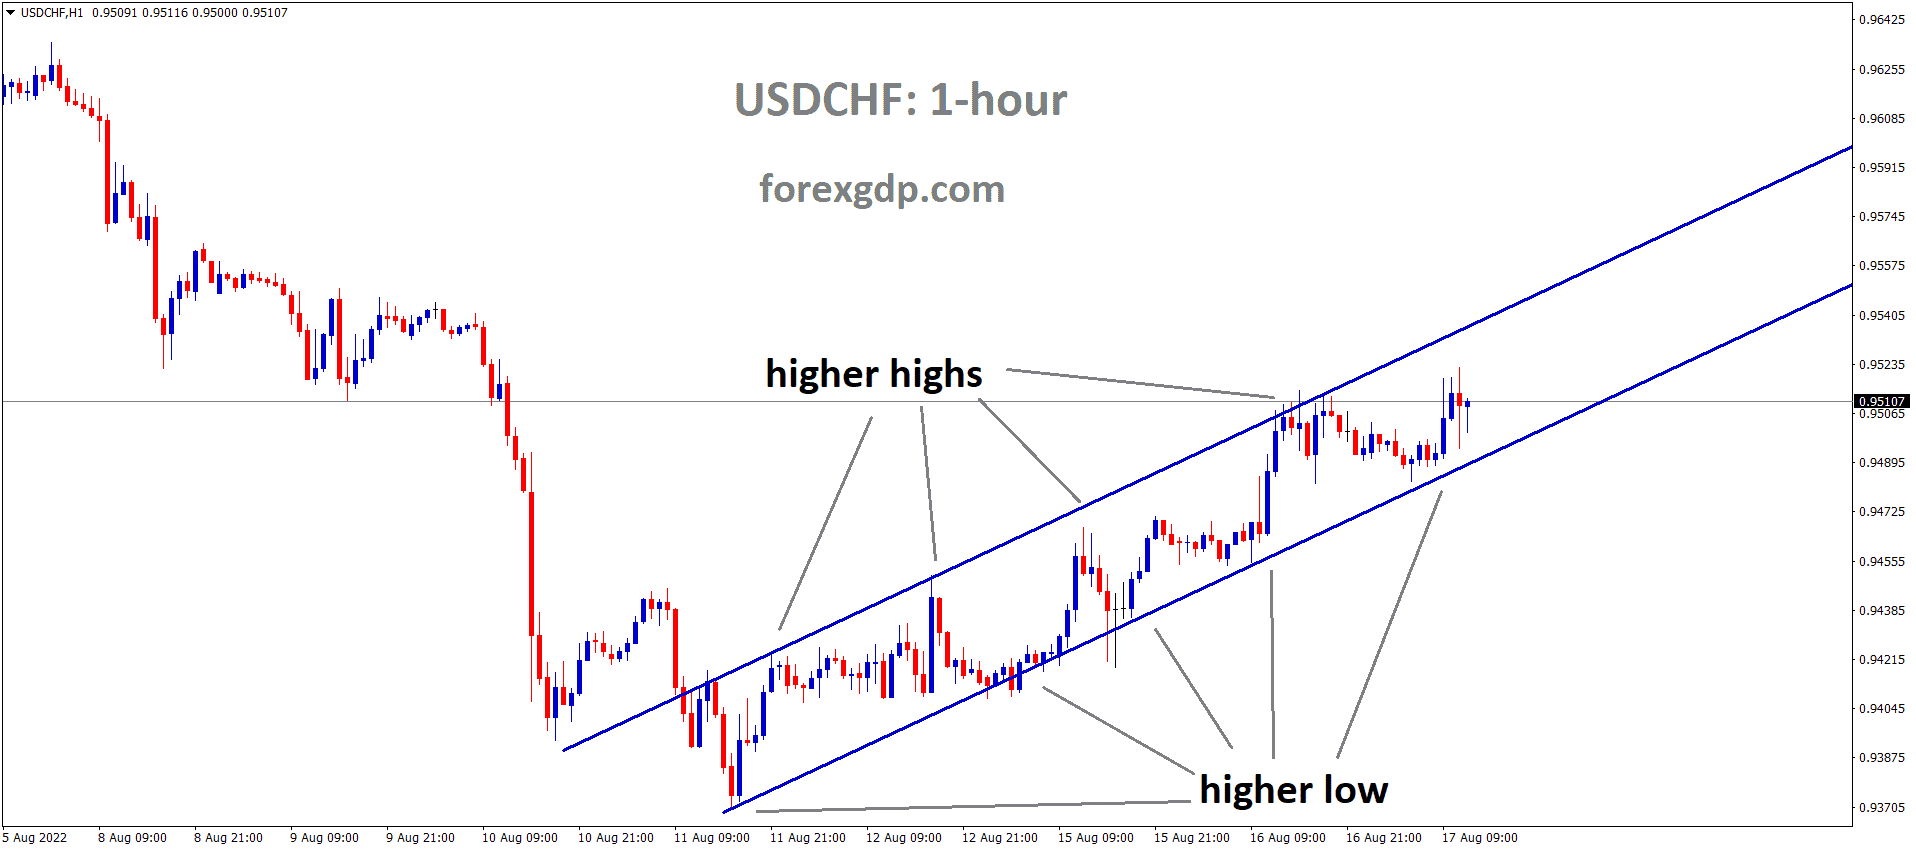 USDCHF is moving in an Ascending channel and the Market has rebounded from the higher low area of the channel 1